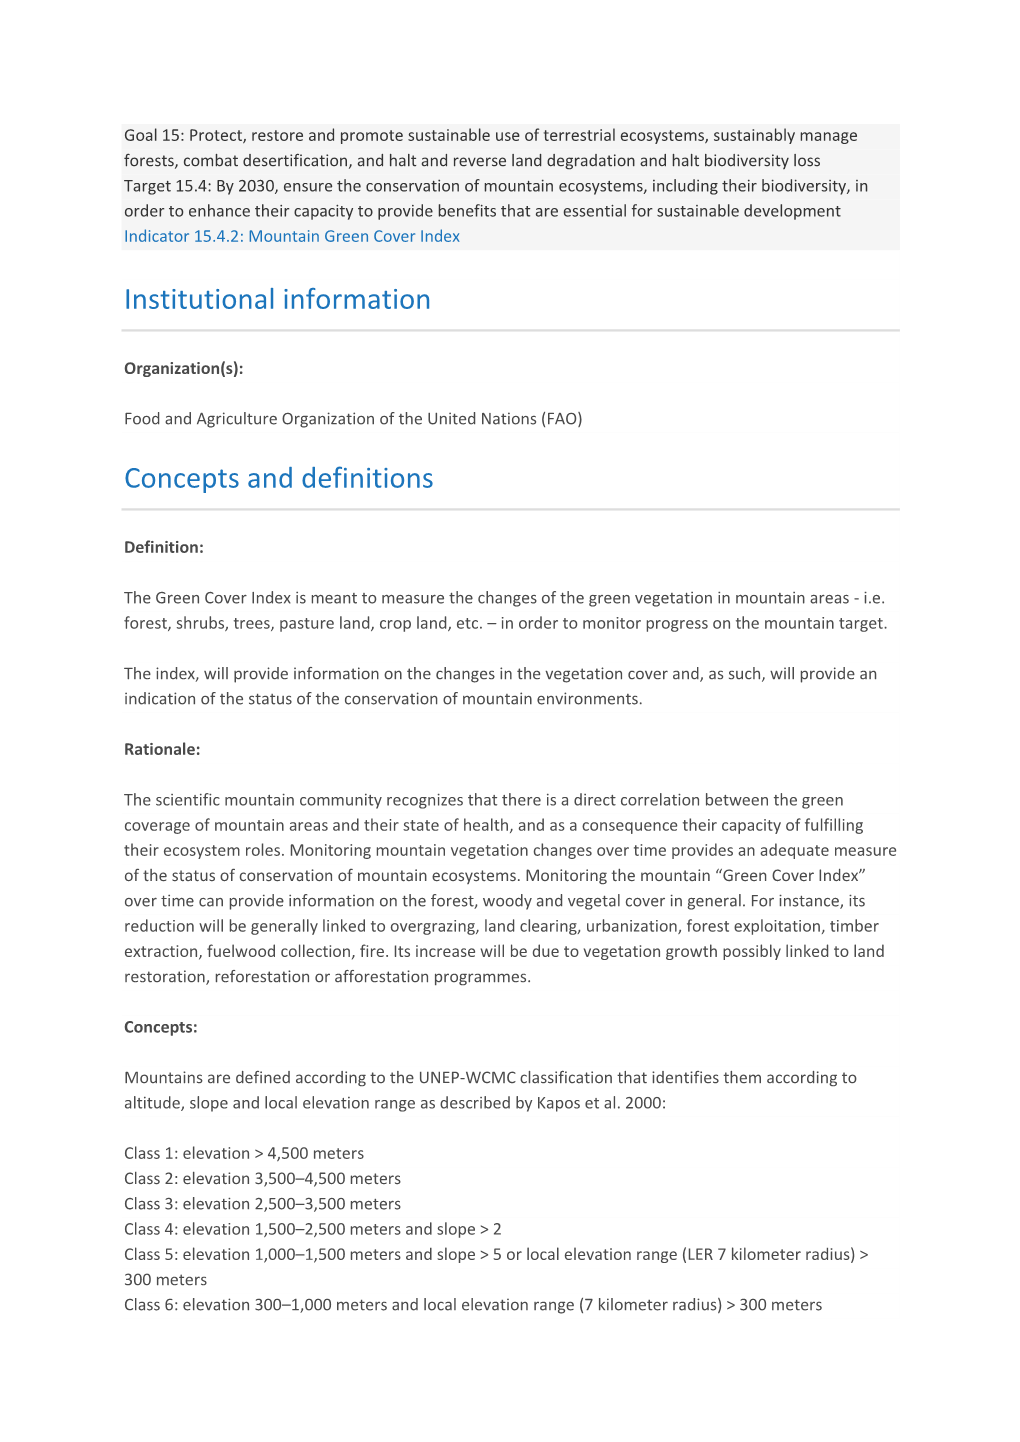 Institutional Information Concepts and Definitions